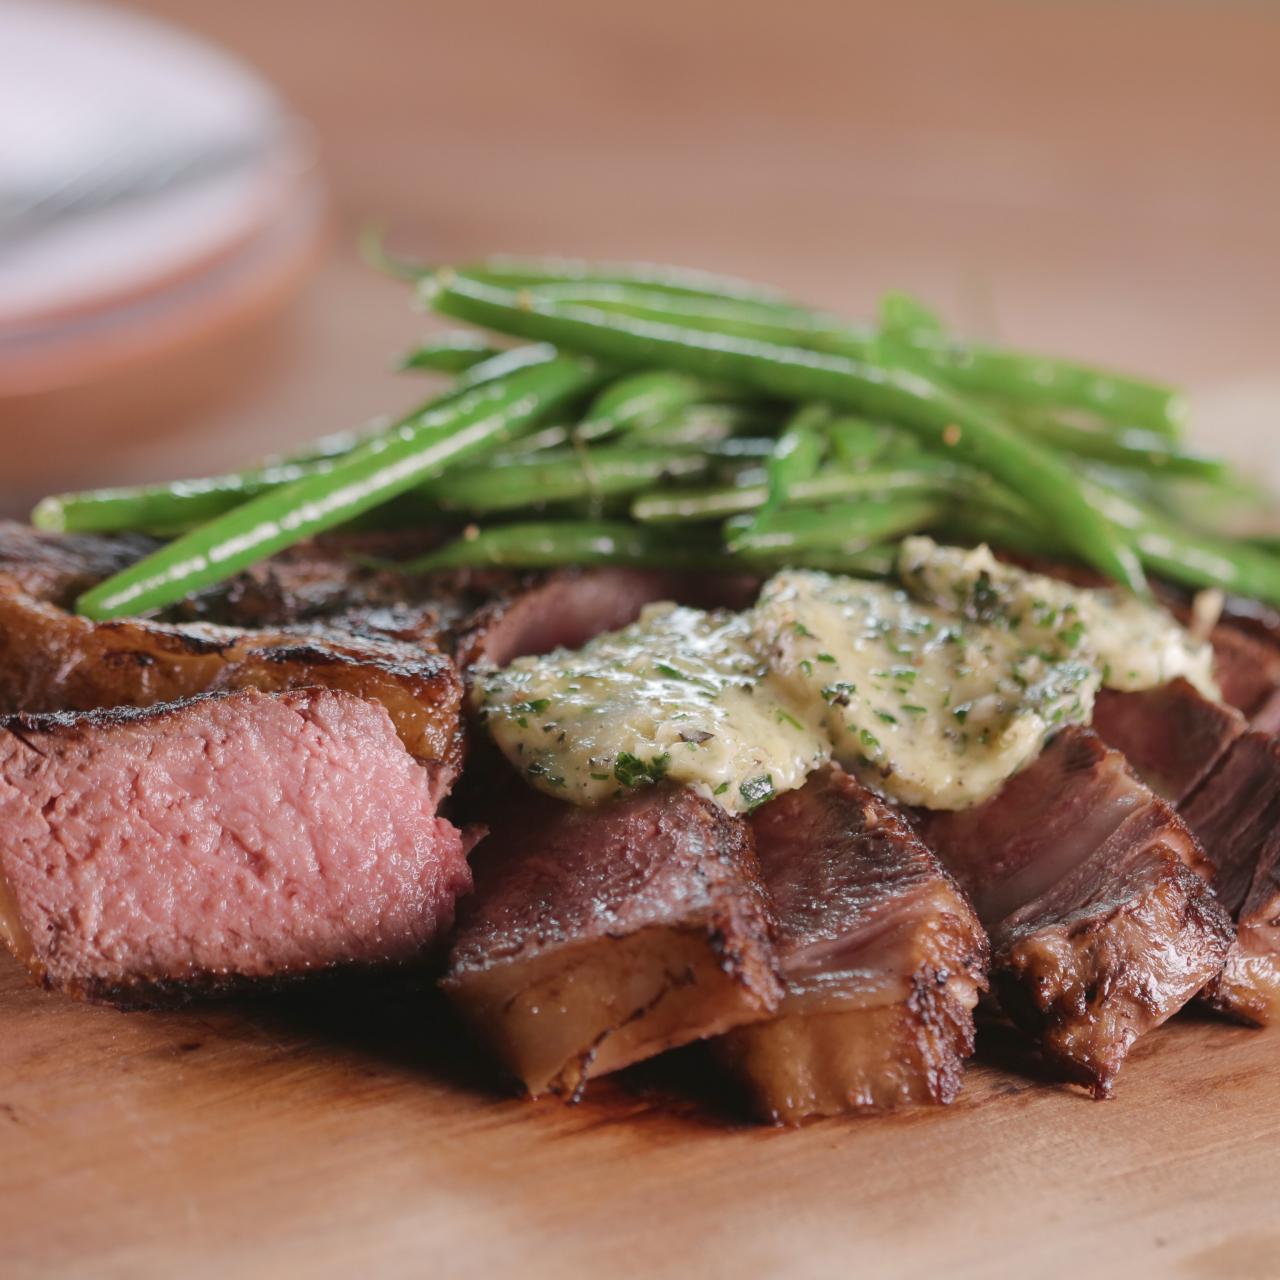 https://food.fnr.sndimg.com/content/dam/images/food/fullset/2016/3/1/0/CCSPL201H_Seared-Steak-and-Green-Beans-with-Herbed-Butter_s4x3.jpg.rend.hgtvcom.1280.1280.suffix/1456953736755.jpeg